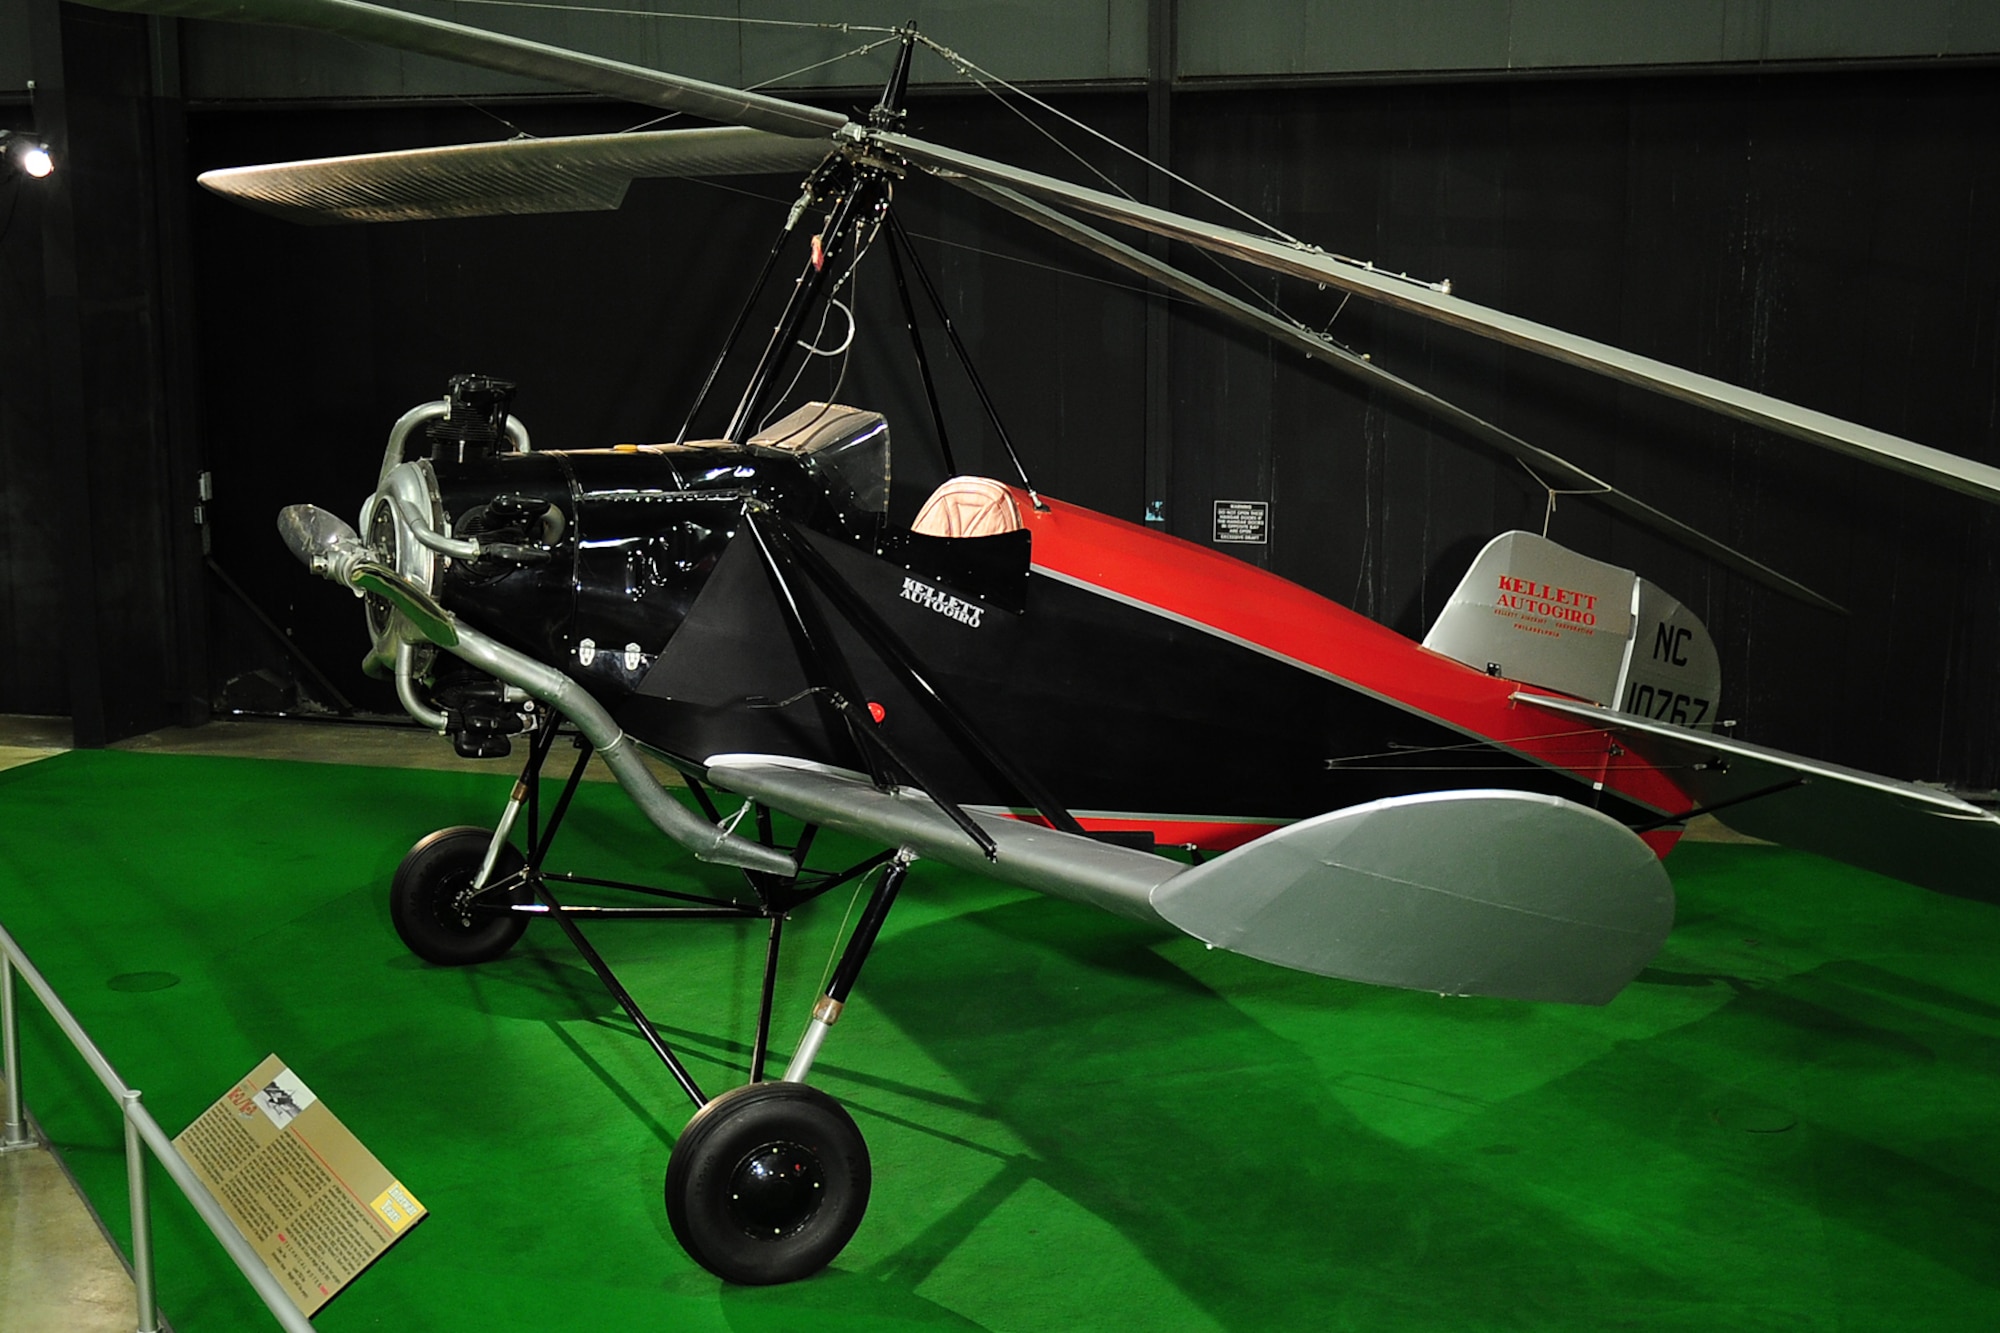 DAYTON, Ohio -- Kellet K-2/K-3 Autogiro in the Early Years Gallery at the National Museum of the United States Air Force. (U.S. Air Force photo)